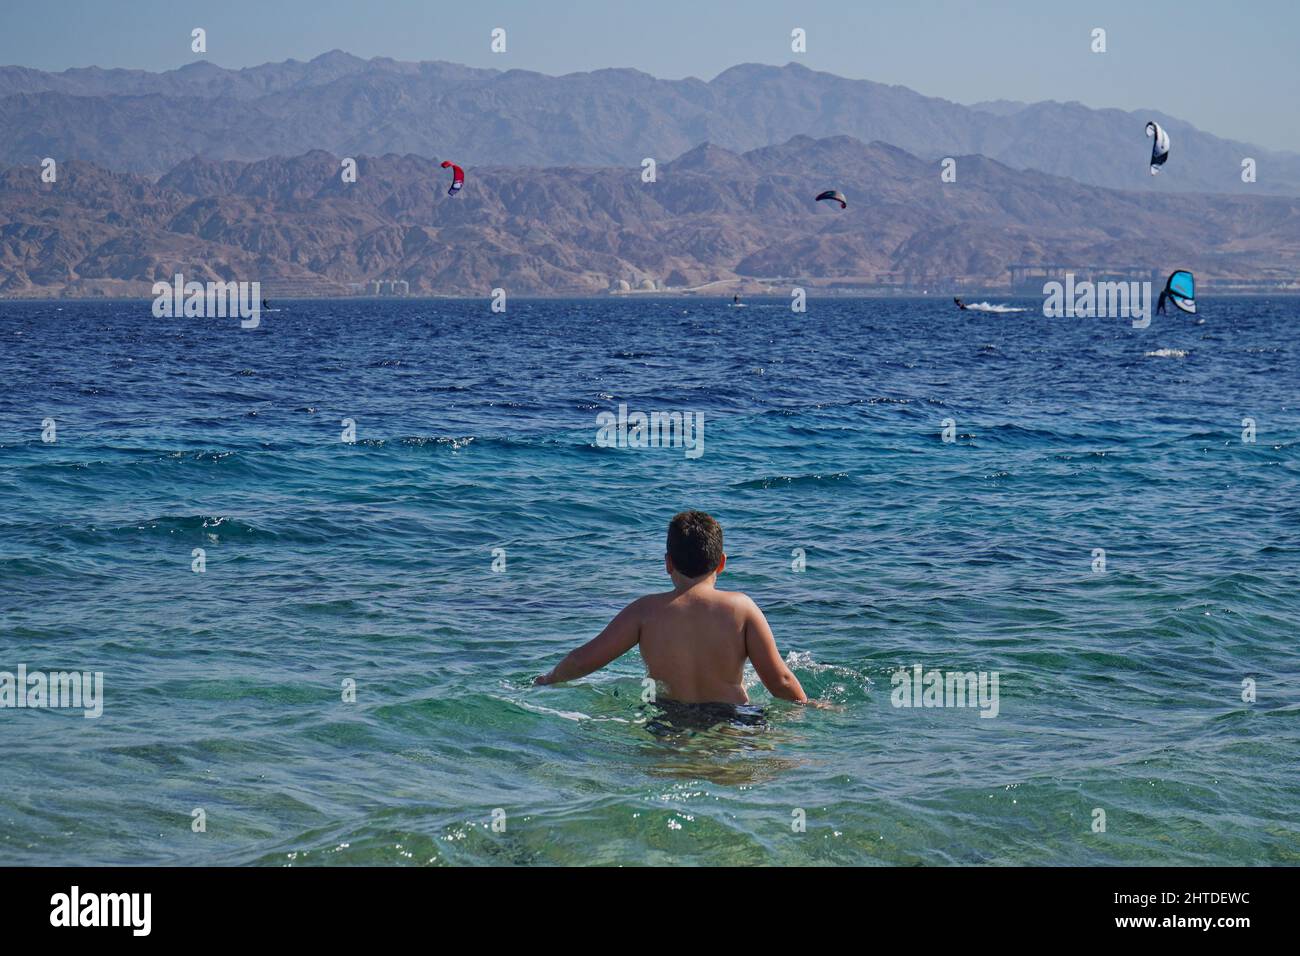 The wind surfing in the sea of Eilat, Israel with the city of Aqaba in Jordan in the background Stock Photo